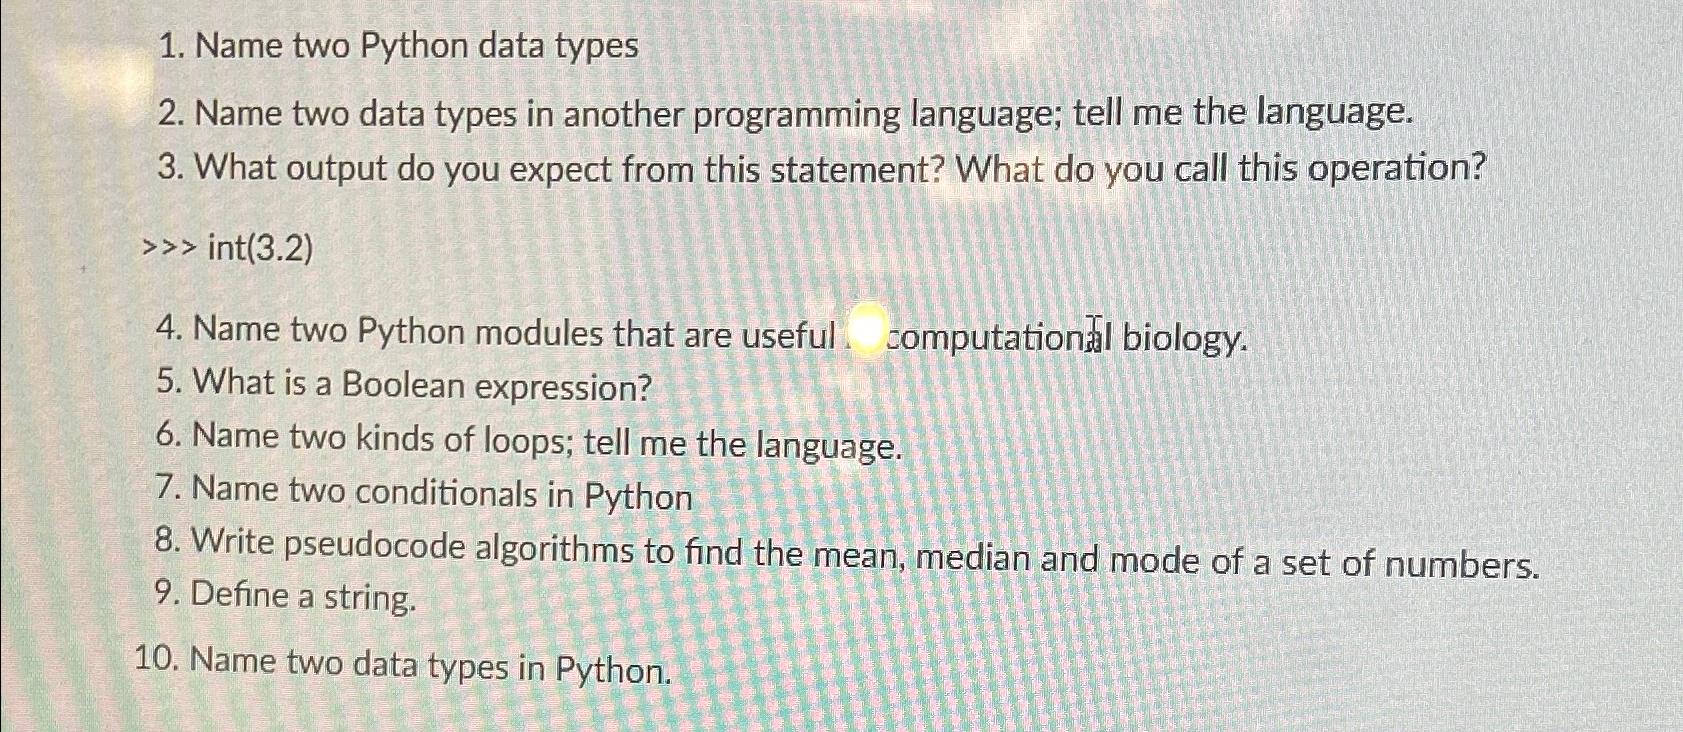 1. Name two Python data types 2.Name two data types in another programming language; tell me the language. 3.